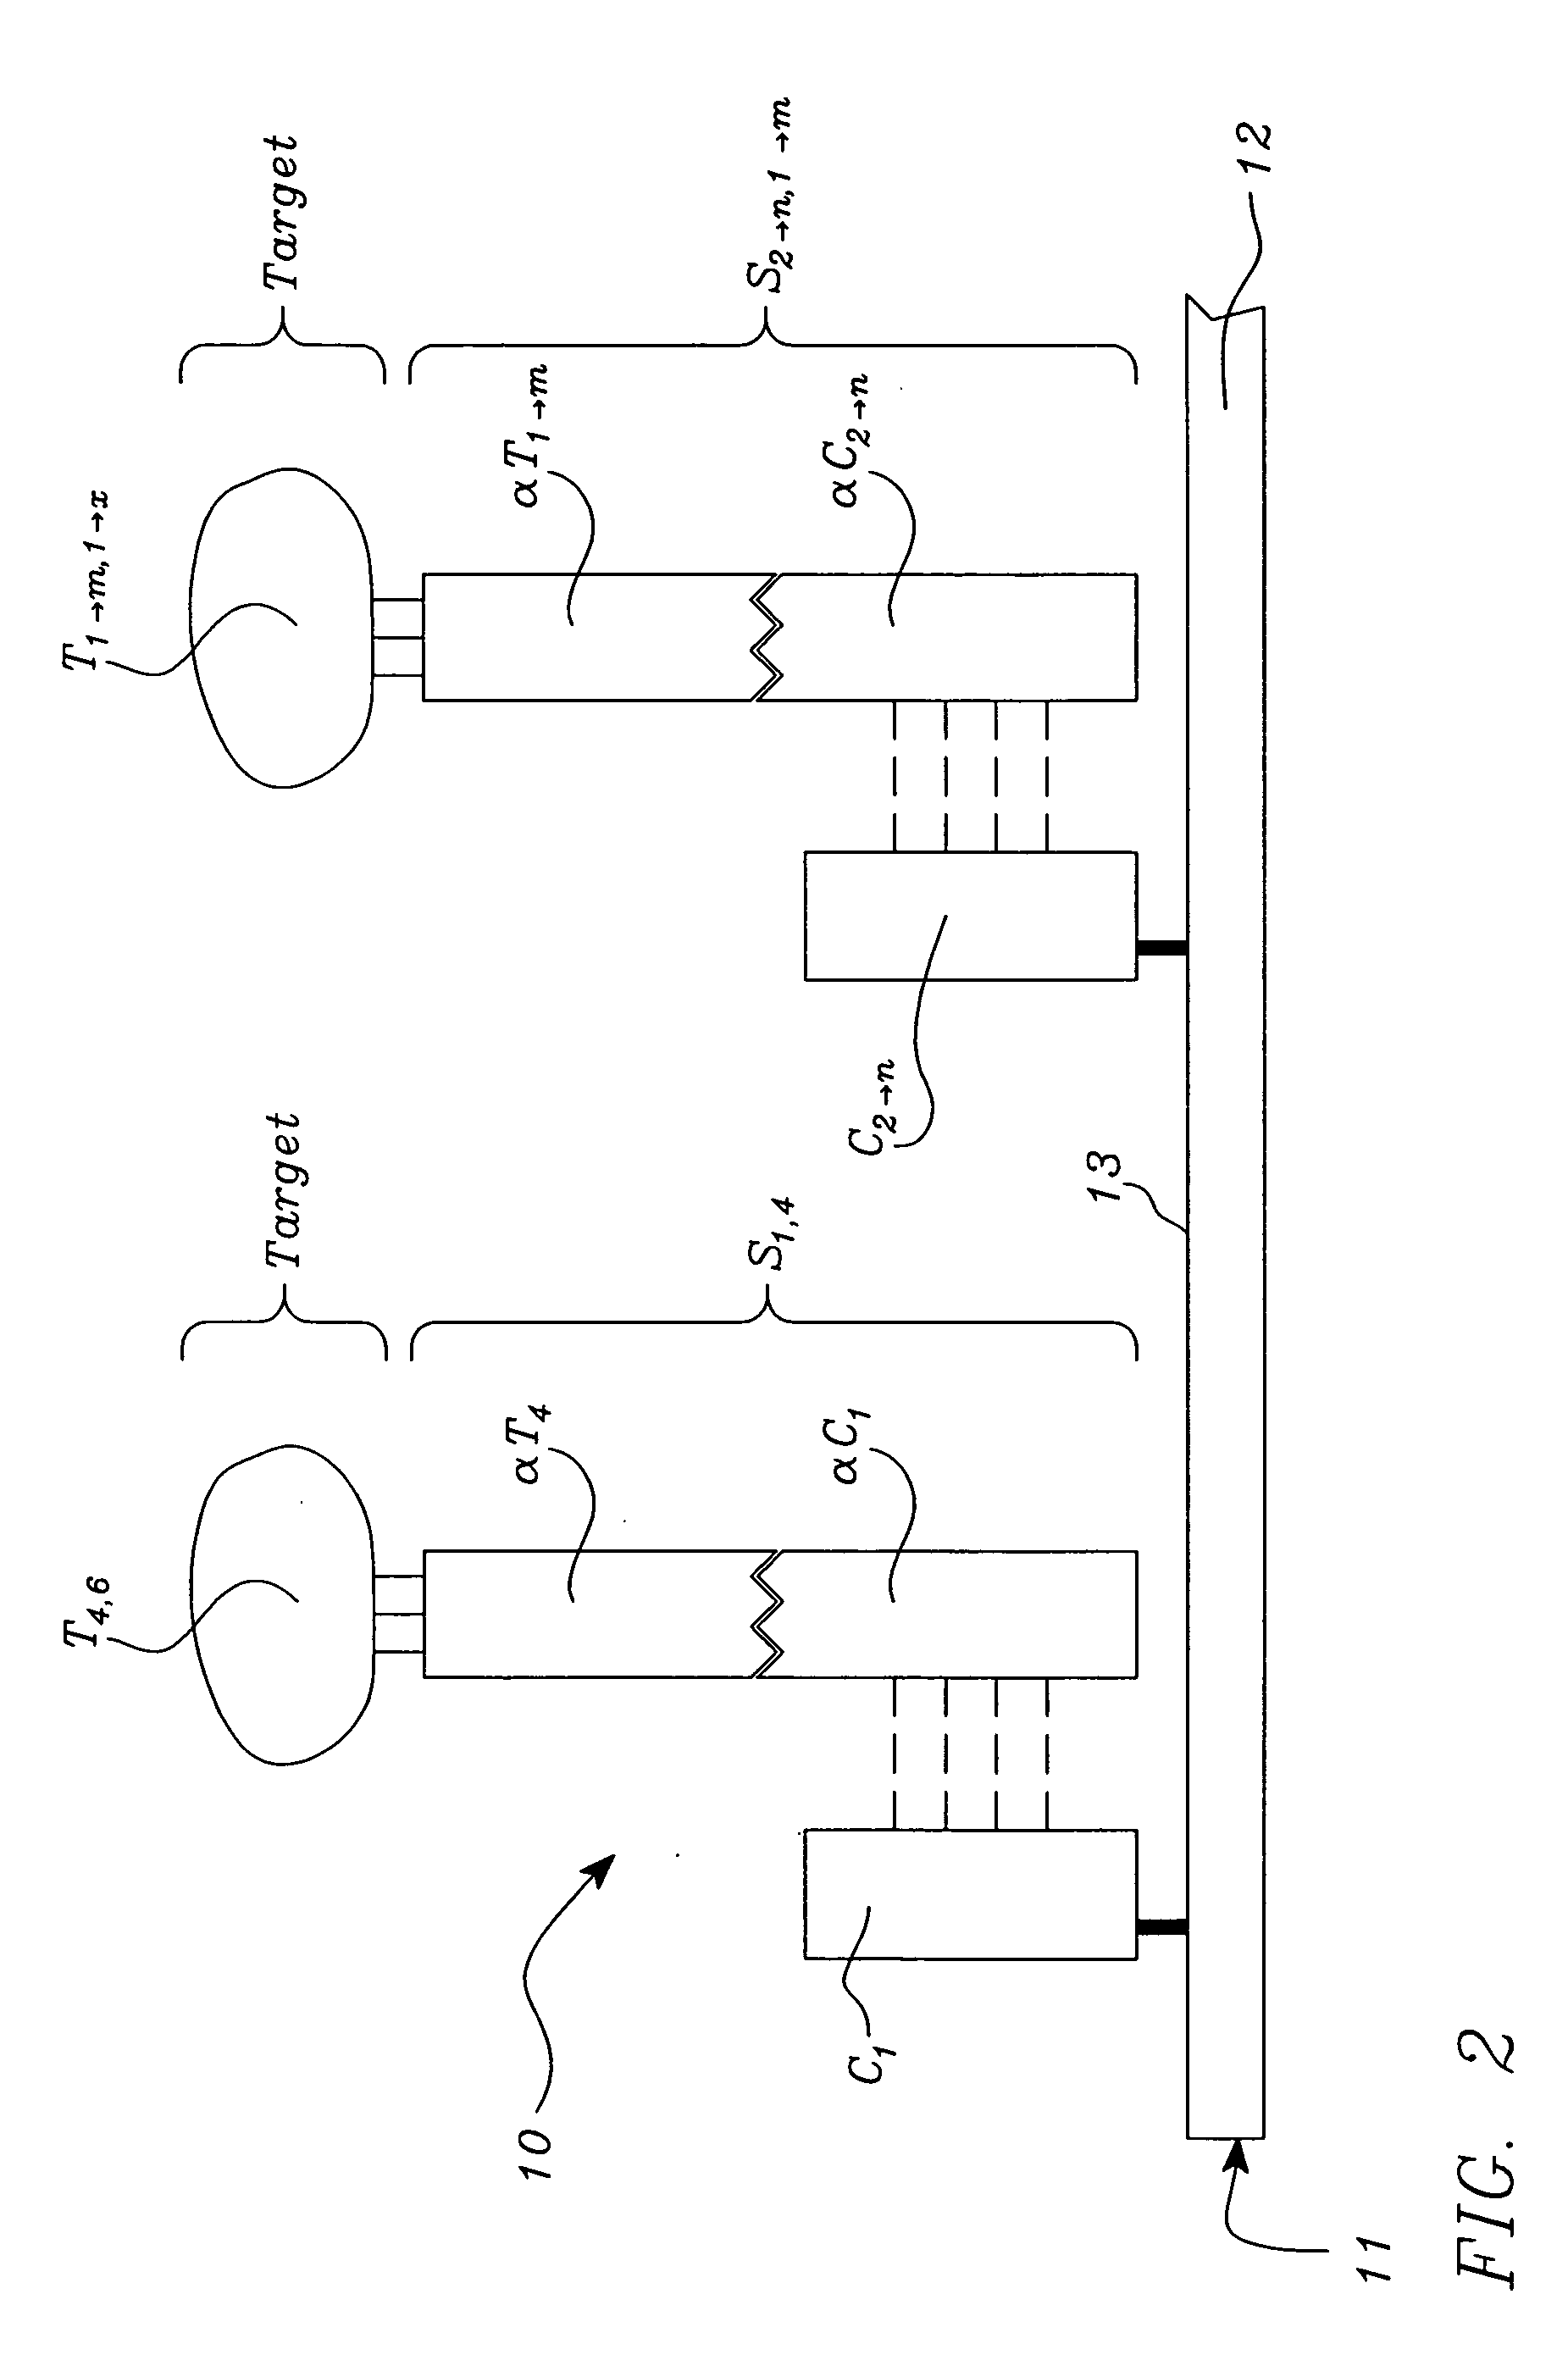 Systems, tools and methods of assaying biological materials using spatially-addressable arrays